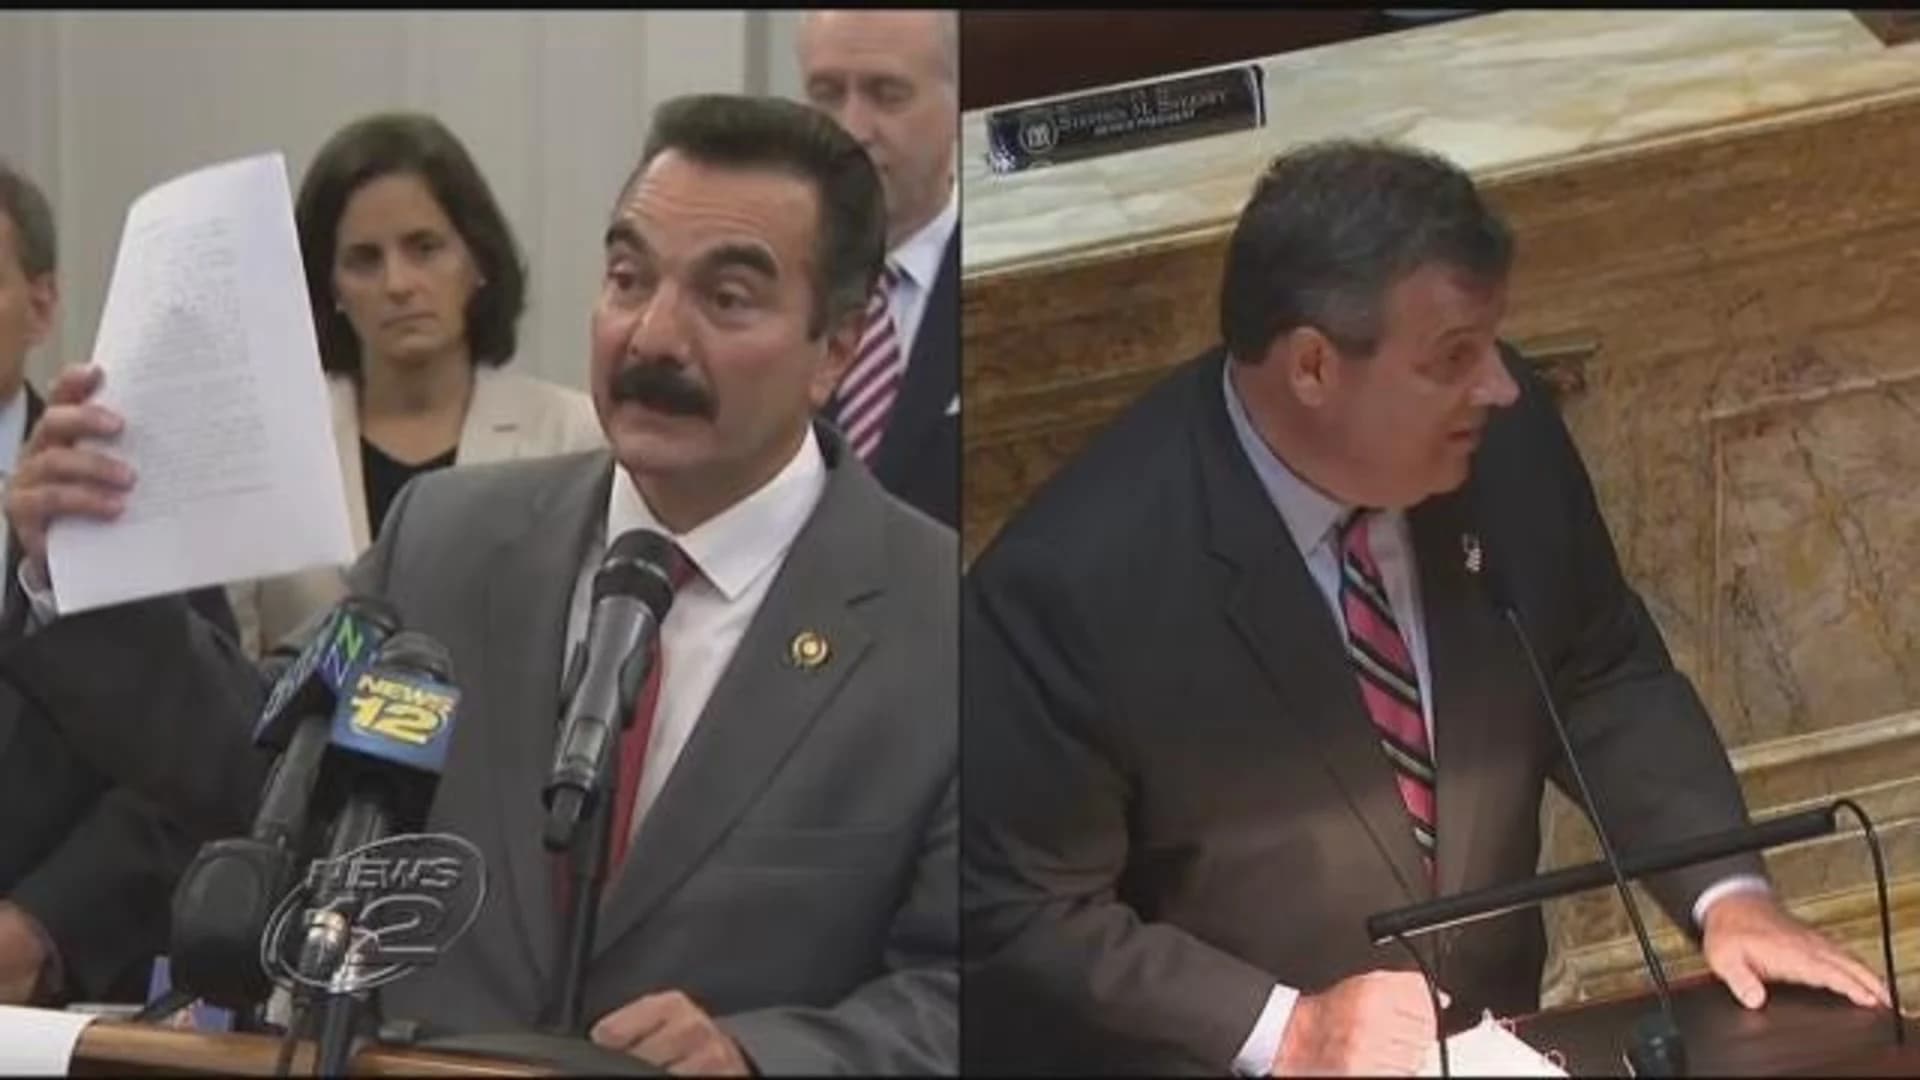 NJ government shutdown continues amid political stalemate